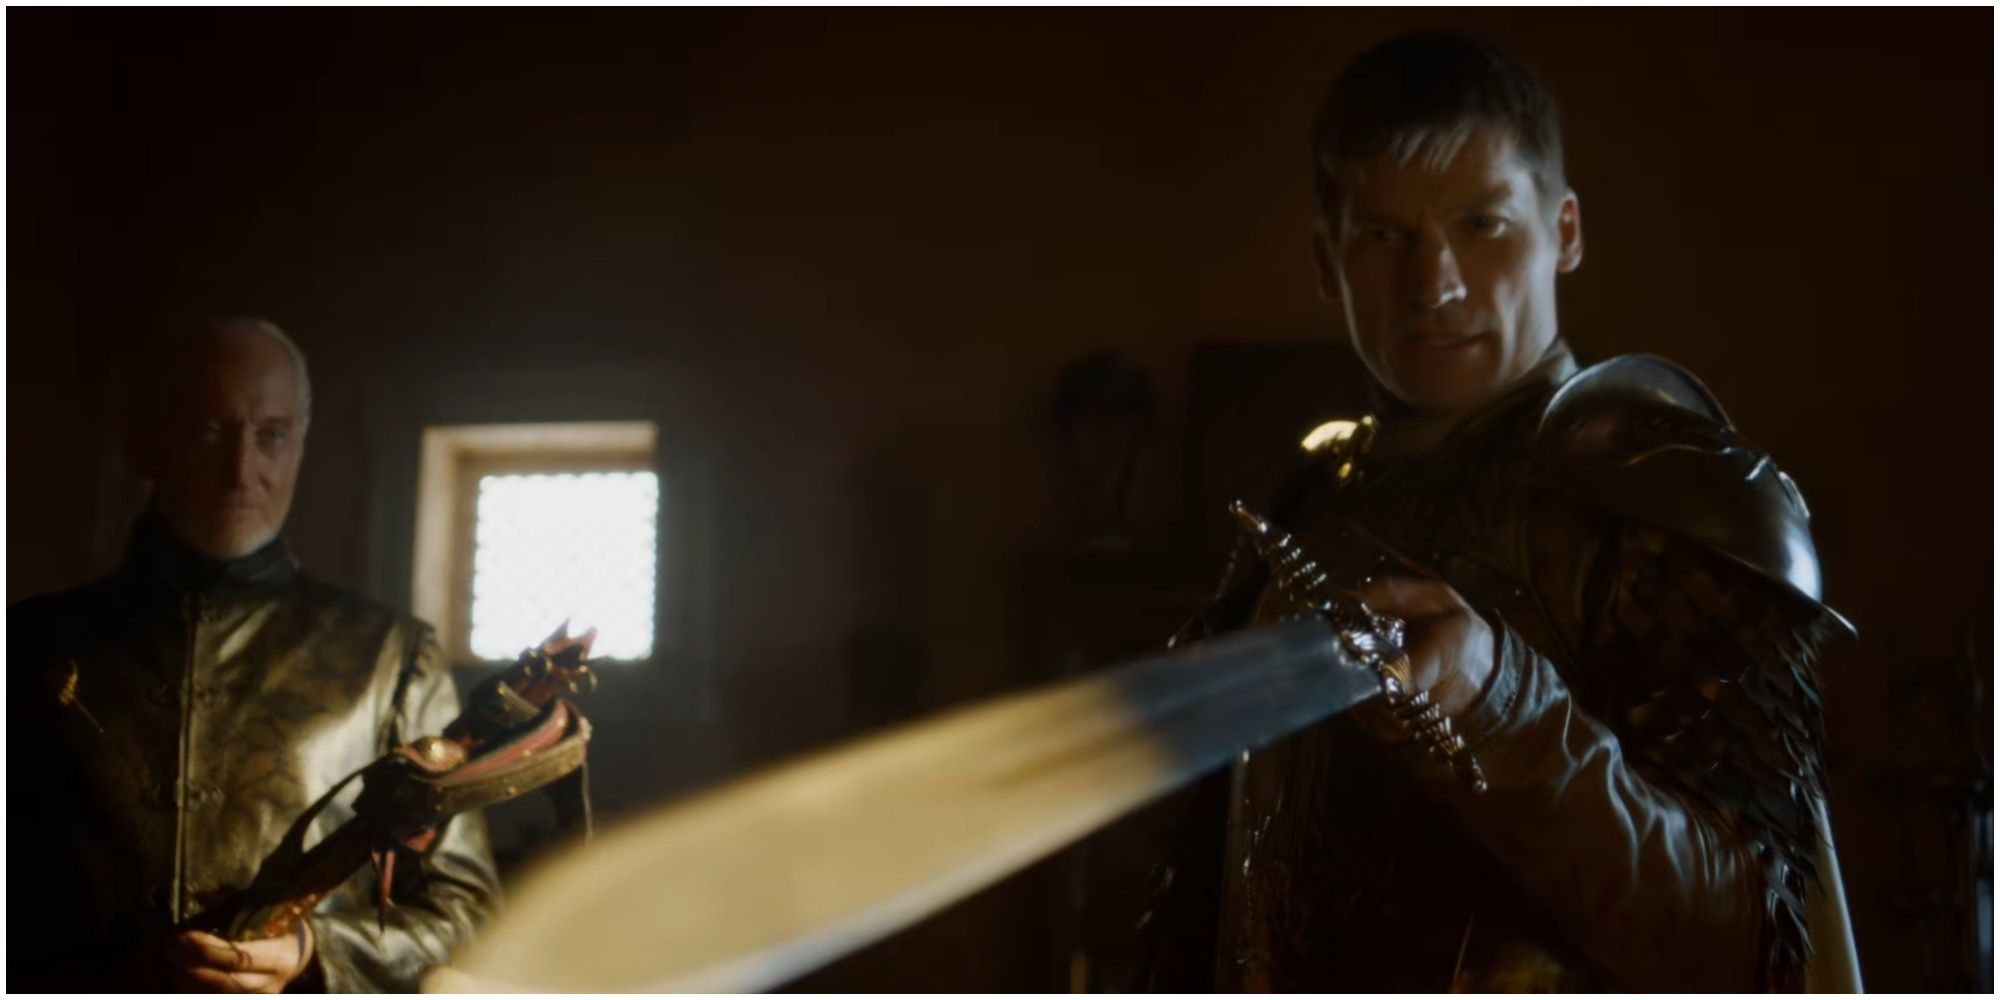 Tywin presents Oathkeeper (unnamed in the scene) to Jaime Lannister in Game of Thrones.